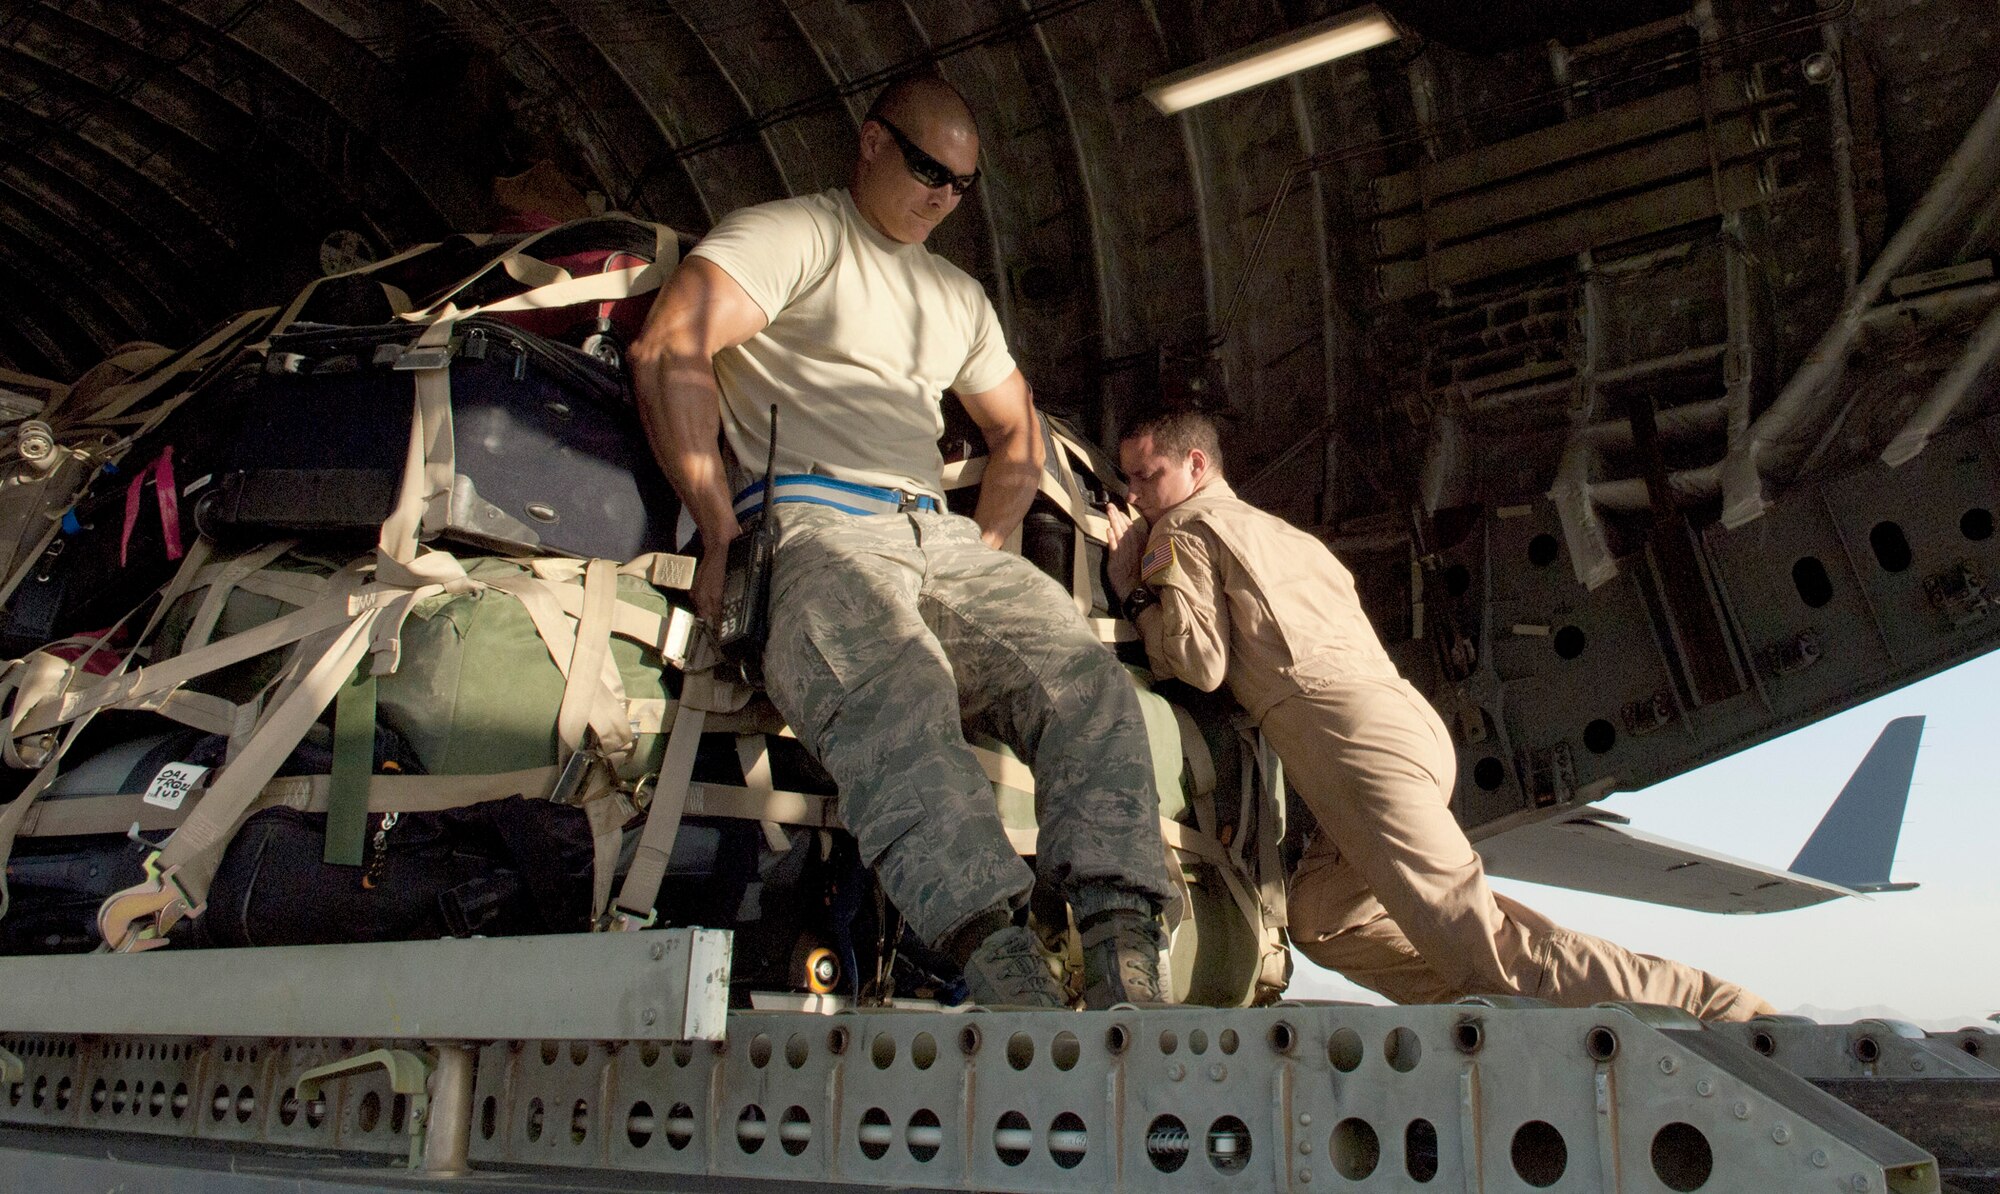 Staff Sgt. Robert Kellen and Staff Sgt. Dough Mathes push a pallet onto a C-17 Globemaster III June 13, 2011, at Bagram Airfield, Afghanistan. Sergeant Kellen is assigned to the 455th Expeditionary Aerial Port Squadron. Sergeant Mathes is assigned to the 816th Expeditionary Airlift Squadron. (U.S. Air Force photo/Senior Airman Natasha E. Stannard)